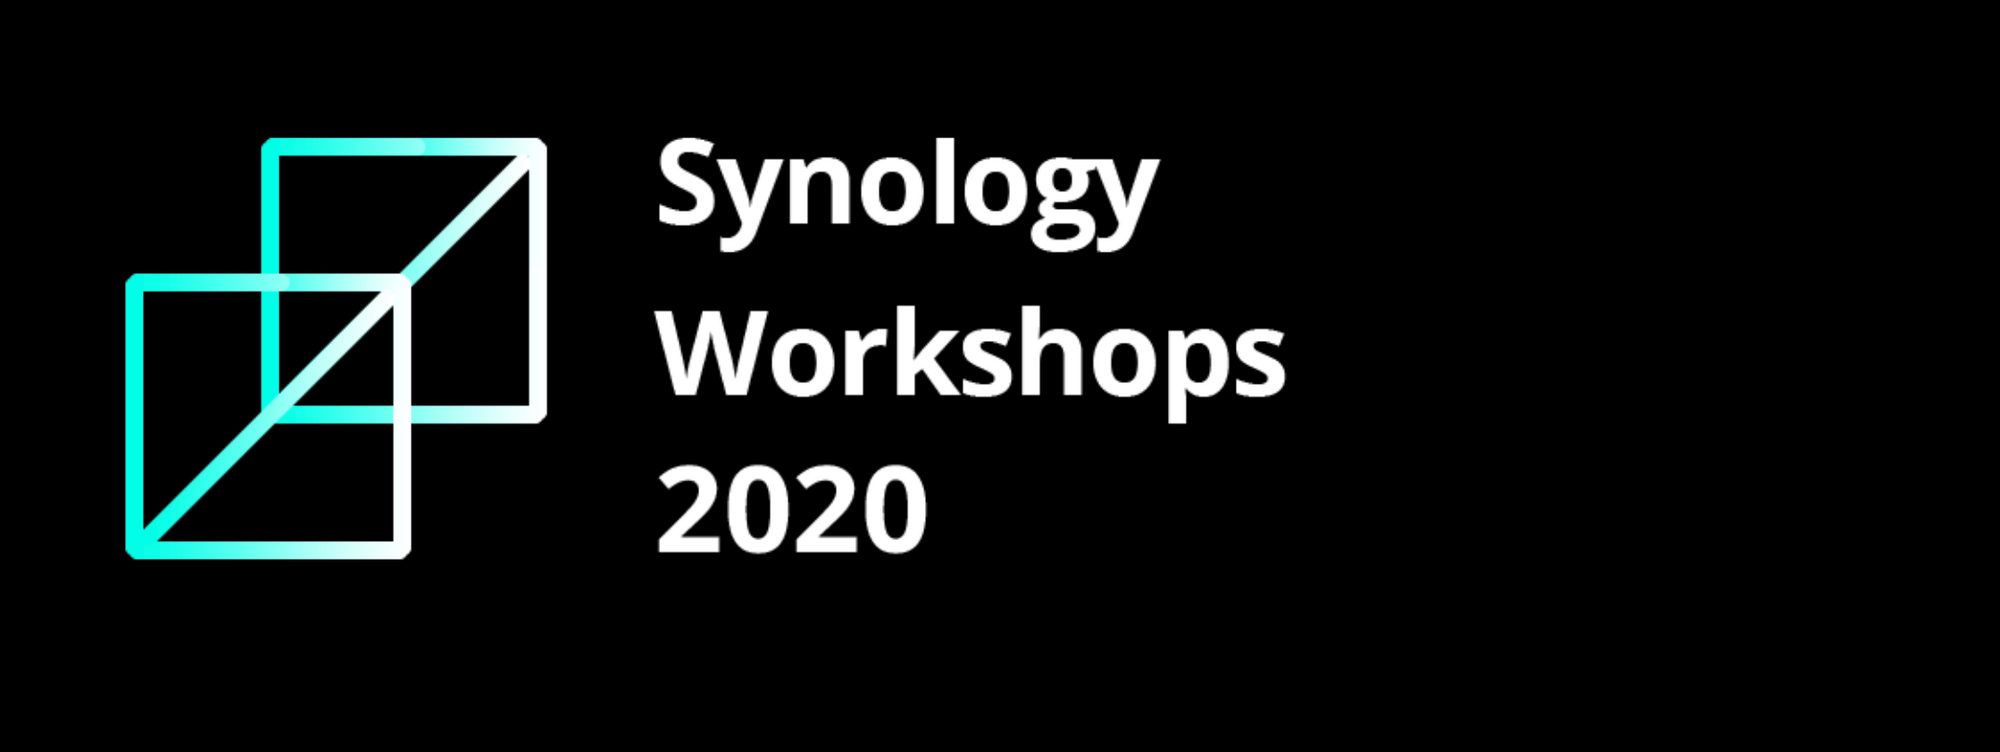 Synology US workshops are now webcasts